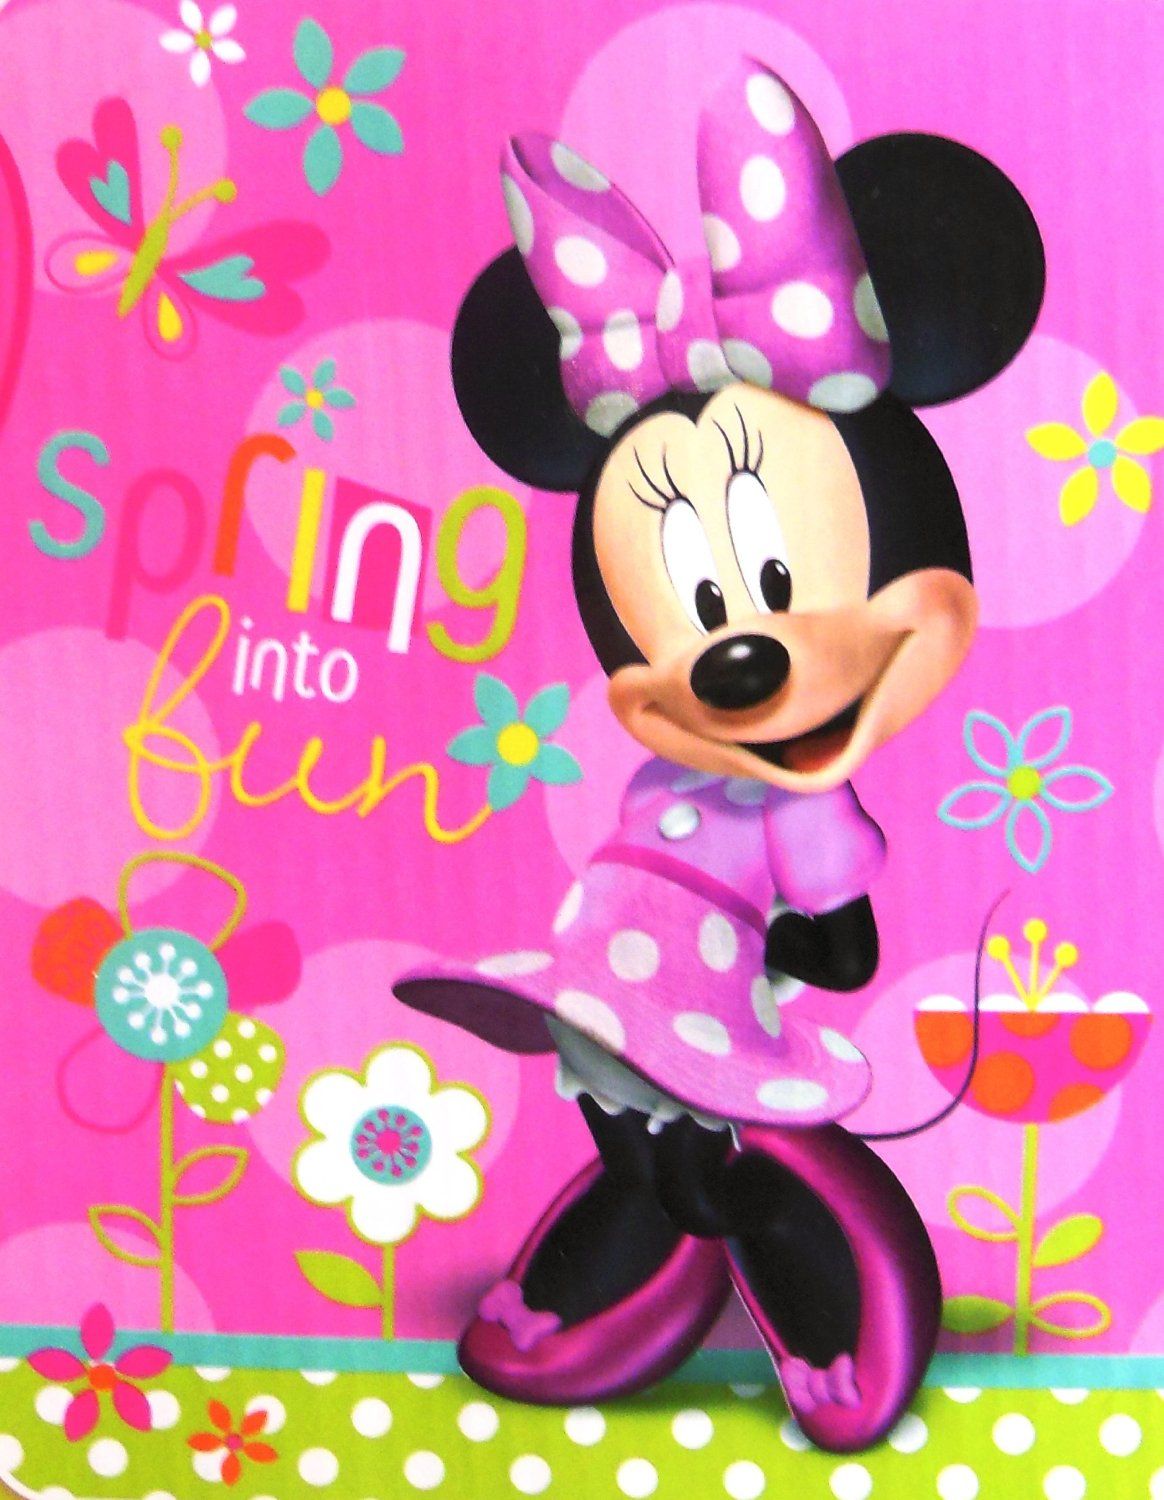 Minnie Mouse Room Decorating Ideas Image Wallpaper for Desktop